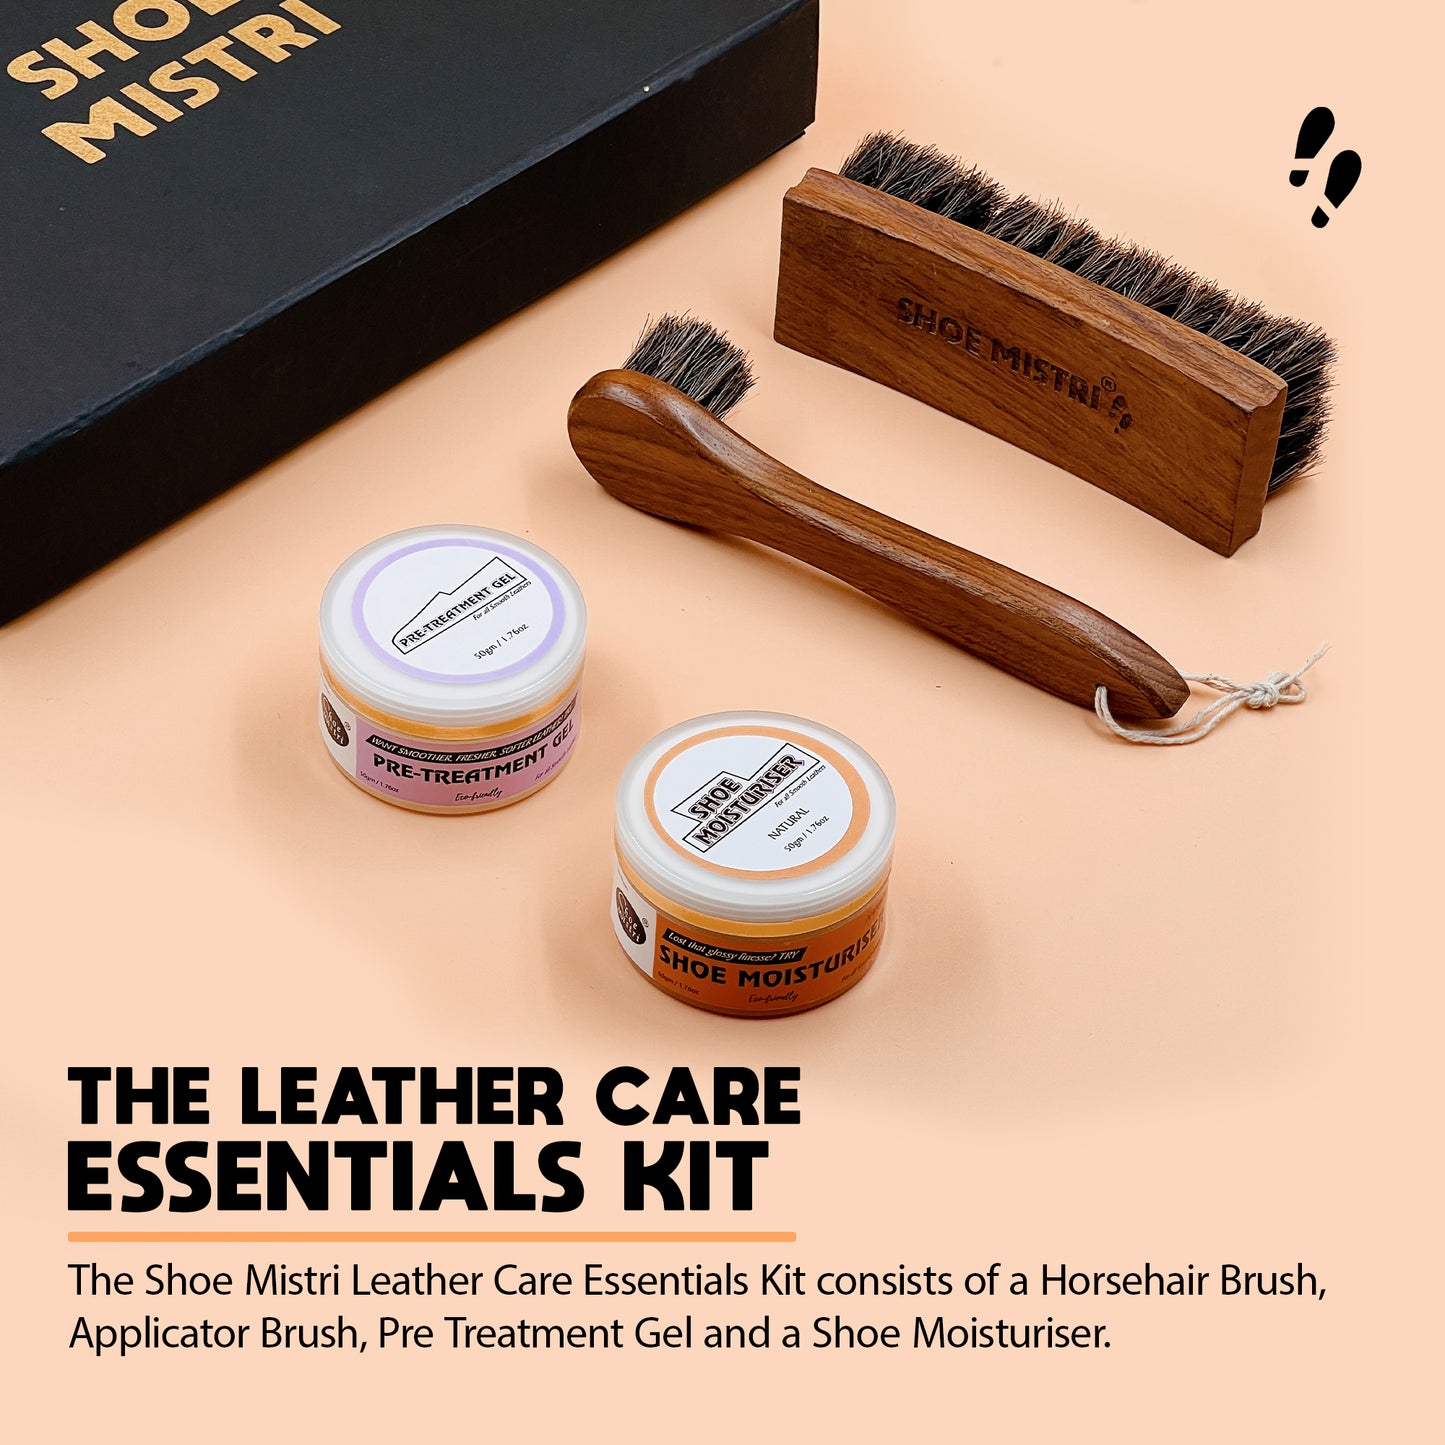 Shoe Mistri Leather Care Essentials Kit Drawer | Pack Of Leather Moisturiser, Pre-treatment Gel, Horse Hair Curved Brush with Soft Applicator Brush